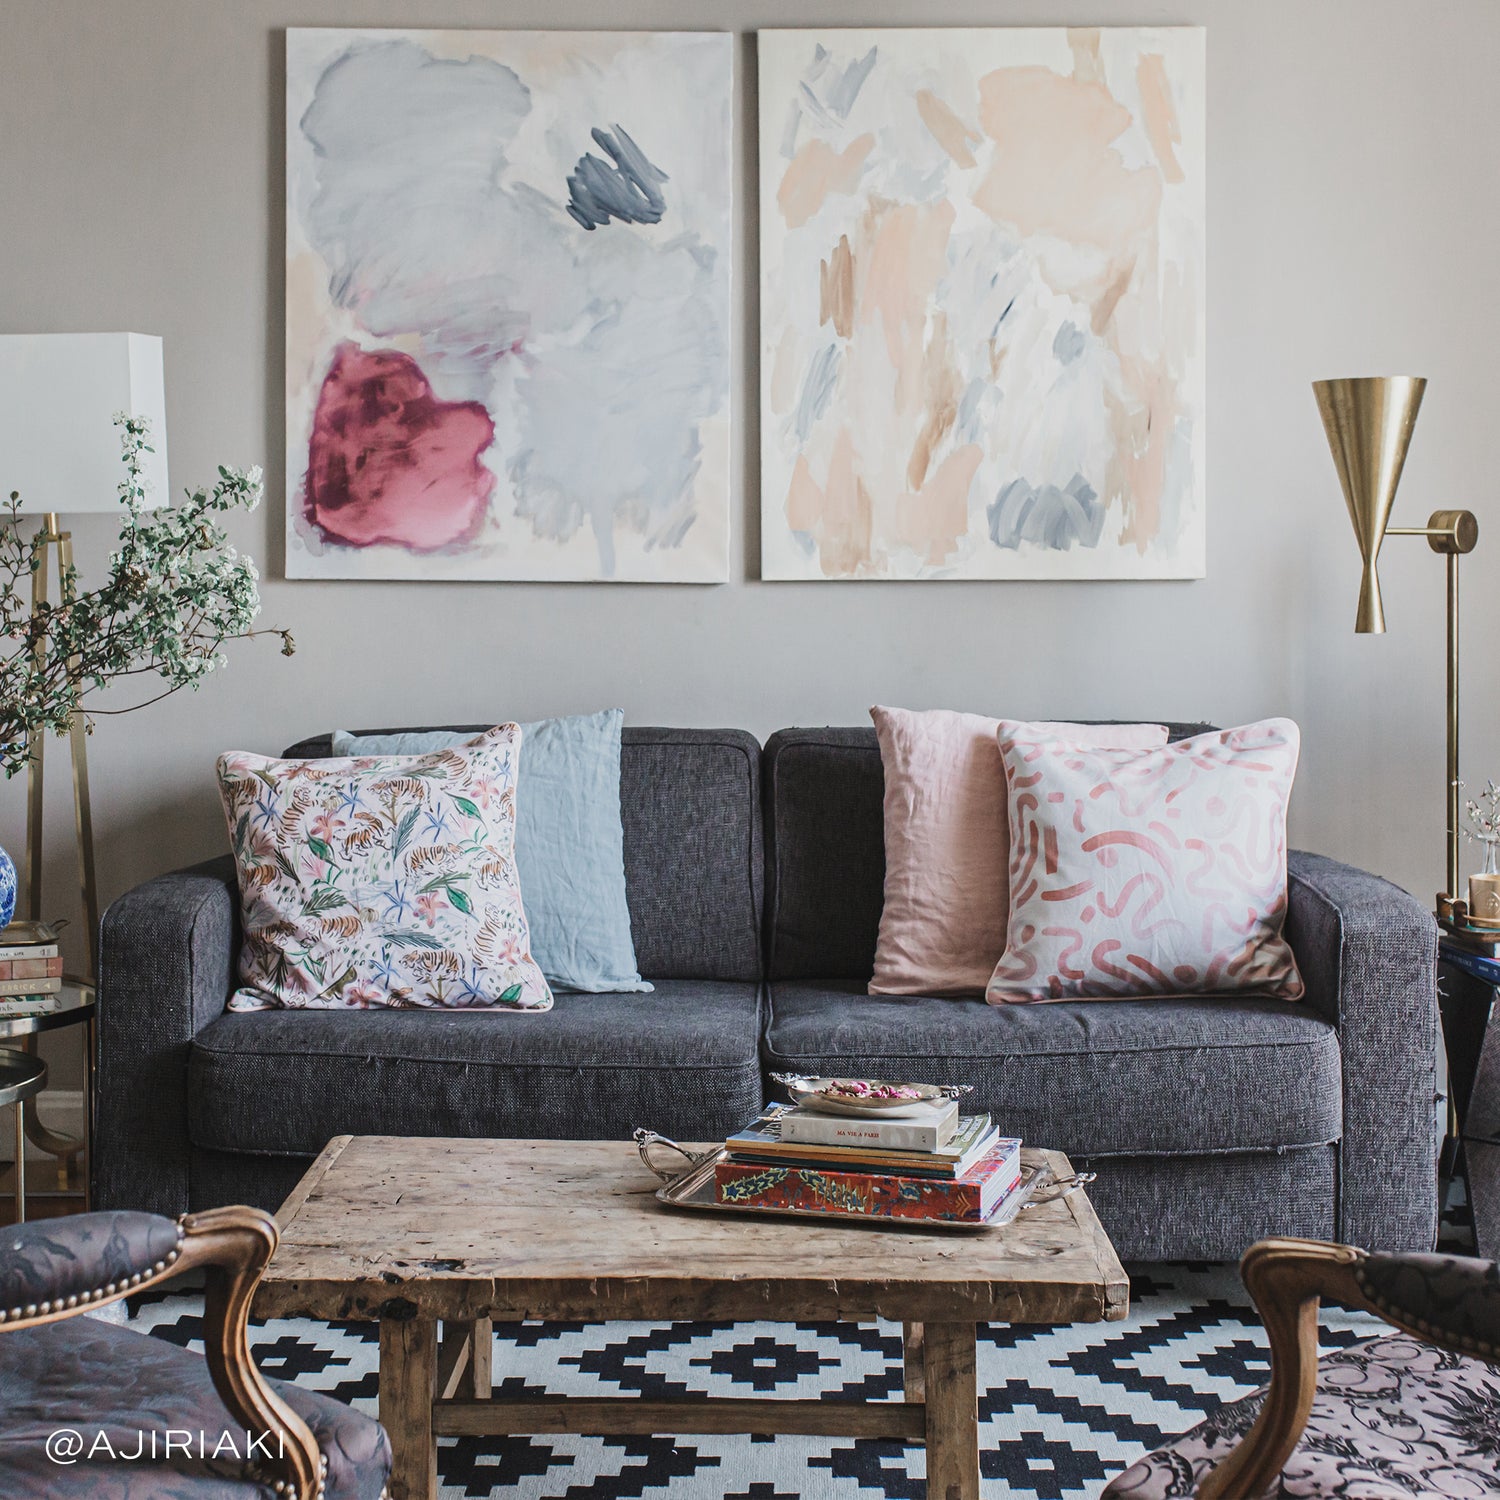 Living room styled with Pink Graphic Printed Pillow and Pink Chinoiserie Tiger Printed Pillow on grey couch by wooden coffee table with books stacked on top. Photo taken by Ajiri Aki